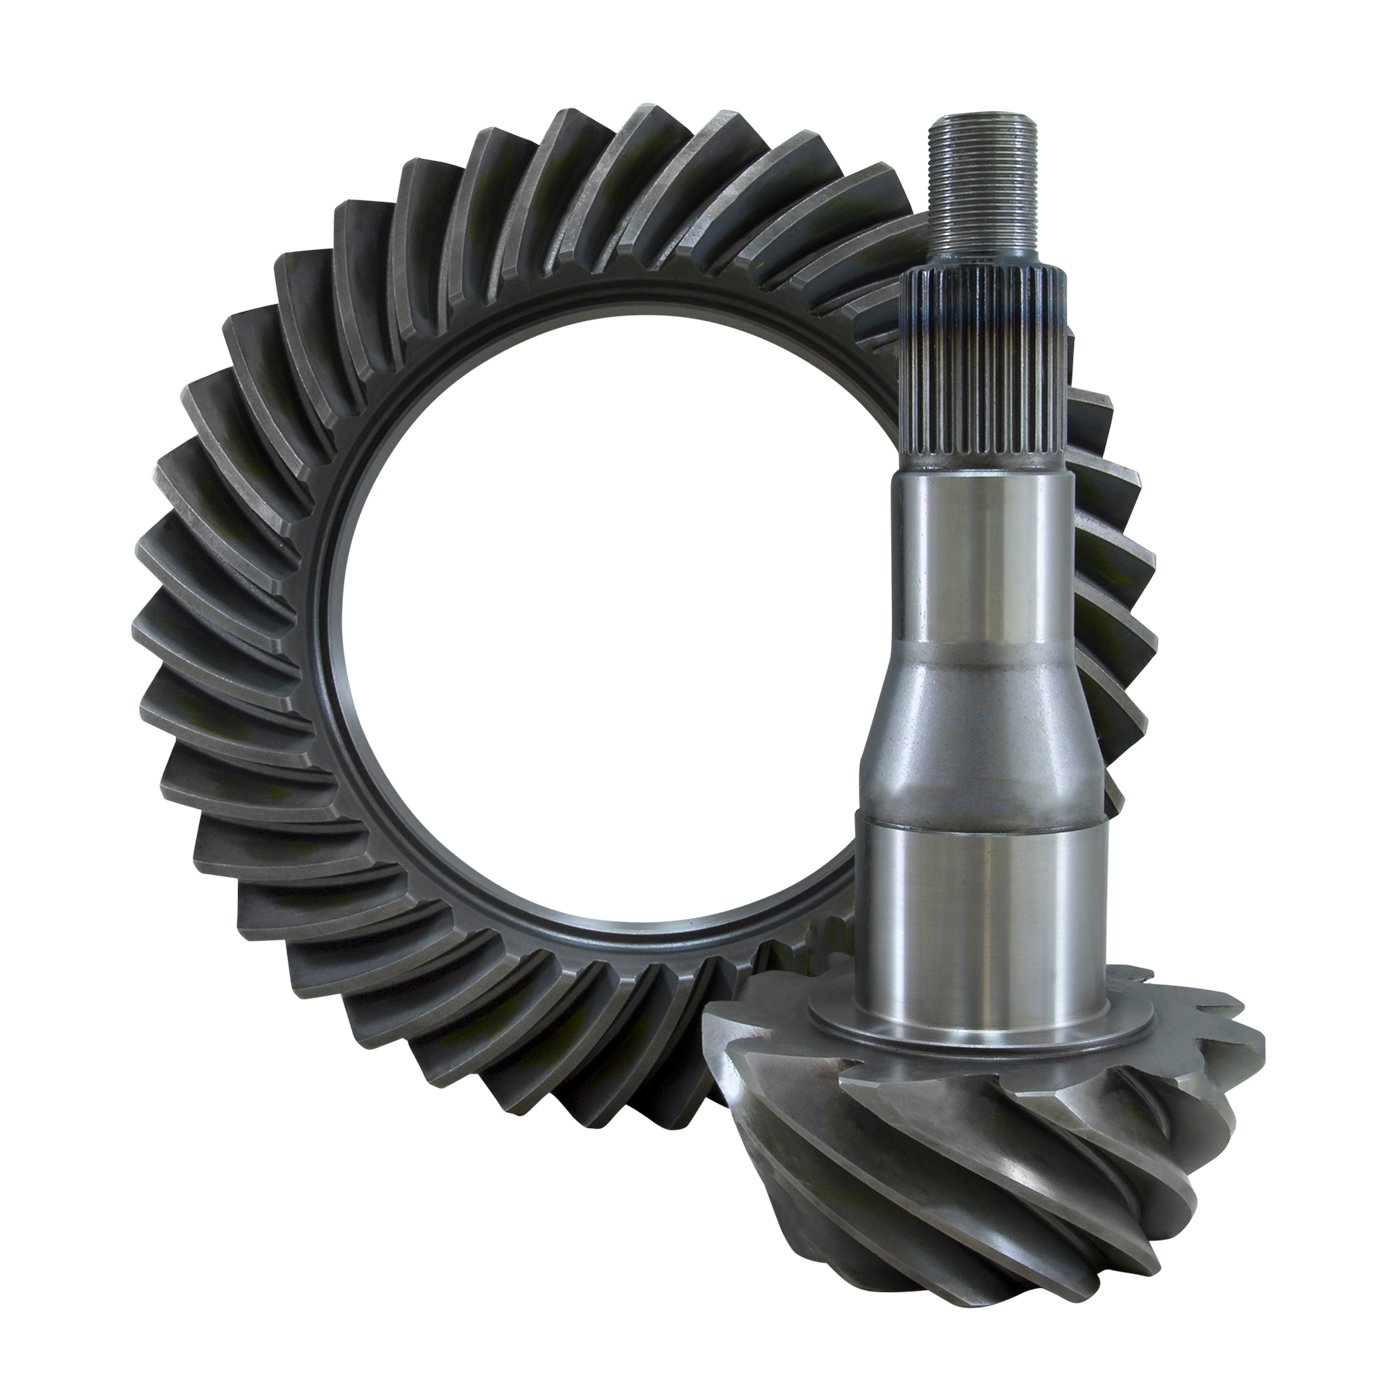 USA Standard 36295 Ring & Pinion Gear Set, For '11 & Up Ford 9.75 in., 4.11 Ratio